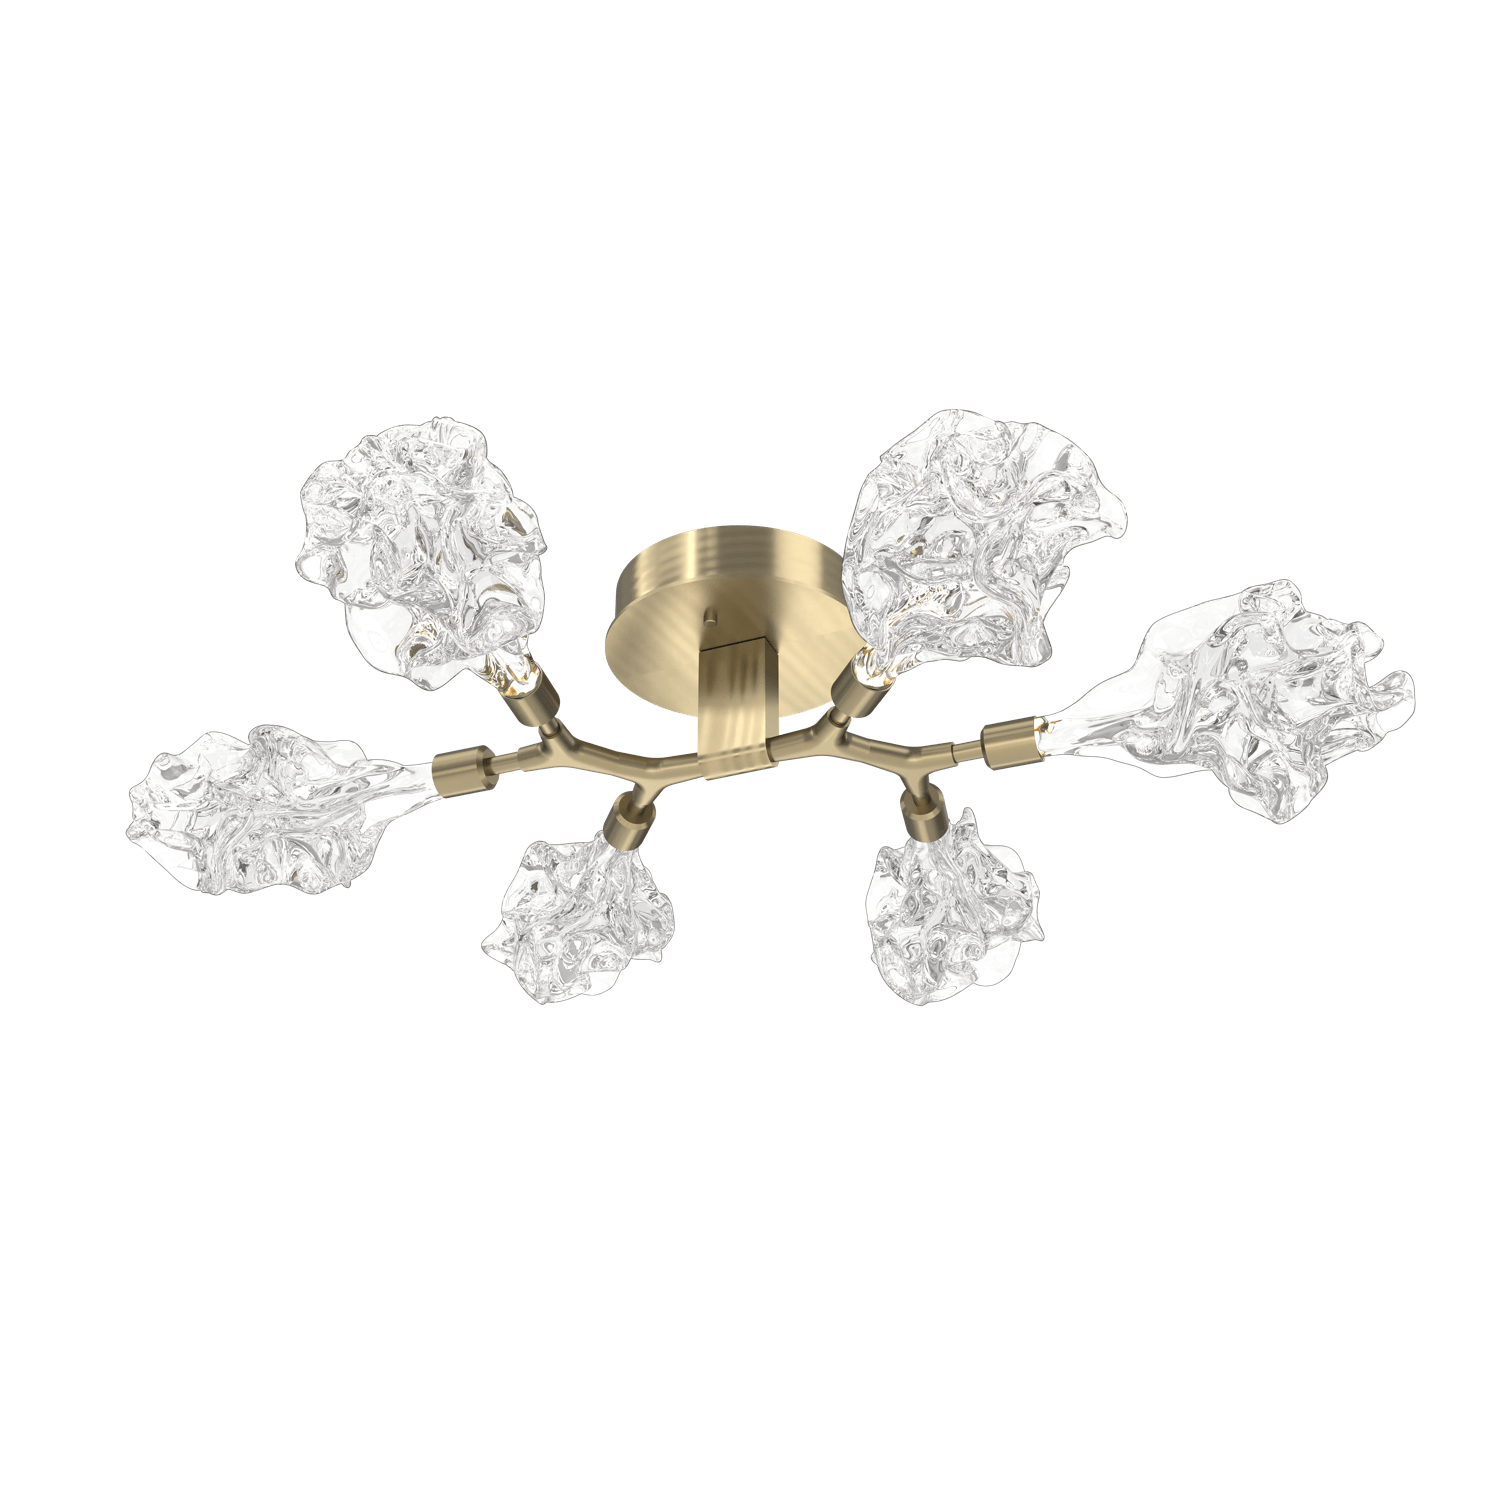 CLB0059-01-HB-Hammerton-Studio-Blossom-6-light-organic-flush-mount-light-with-heritage-brass-finish-and-clear-handblown-crystal-glass-shades-and-LED-lamping